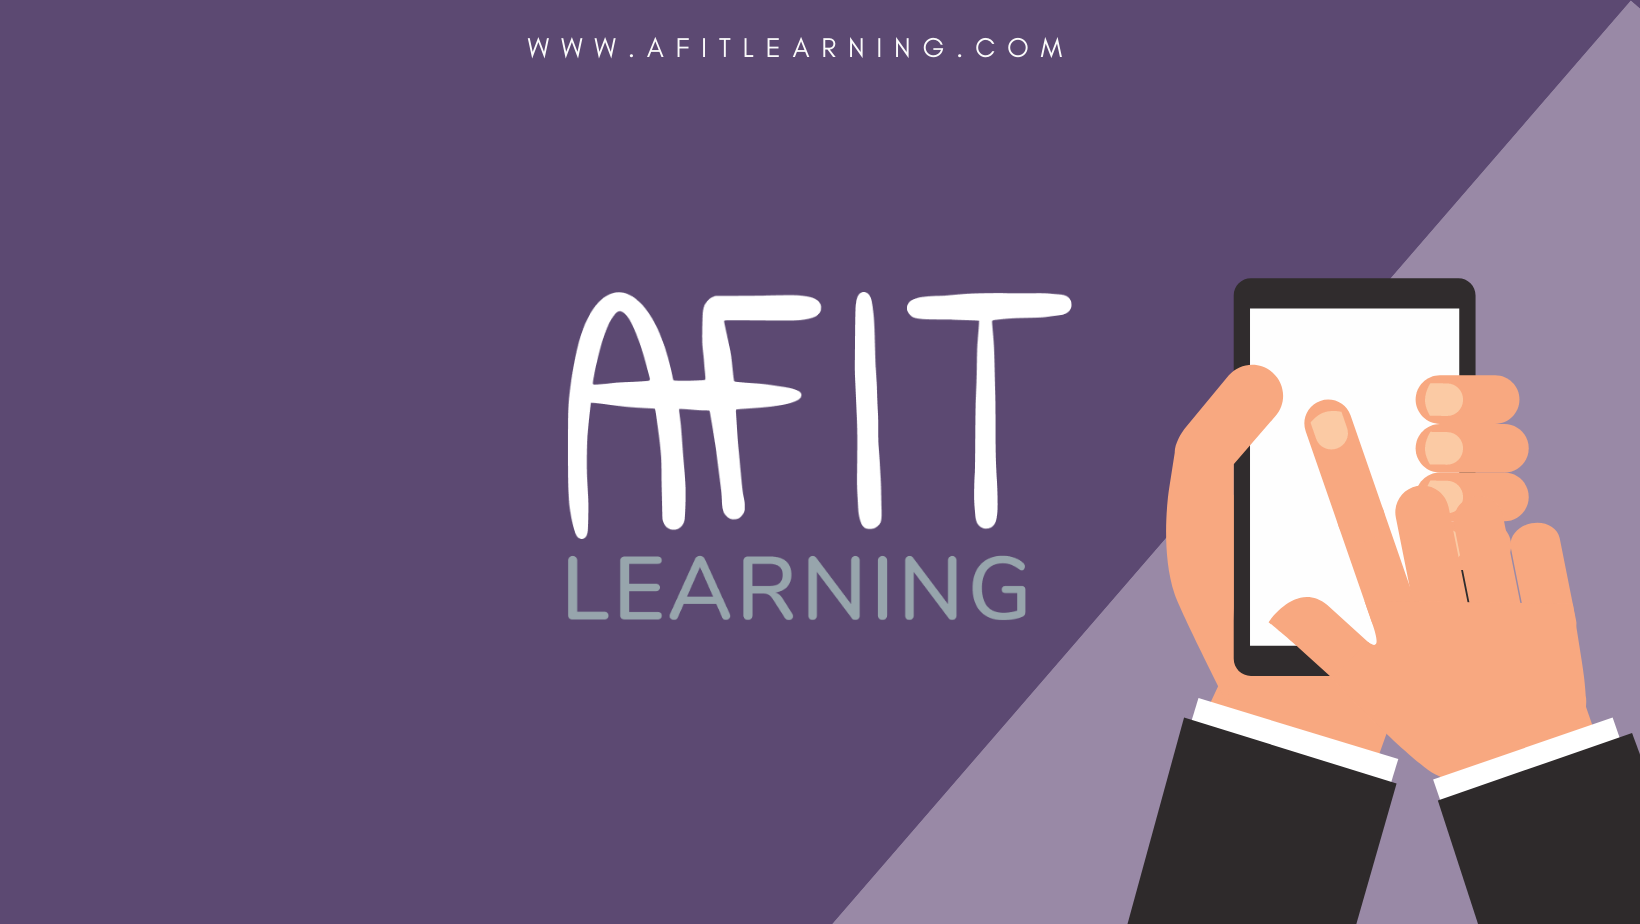 AFIT LEARNING - Banners for Social